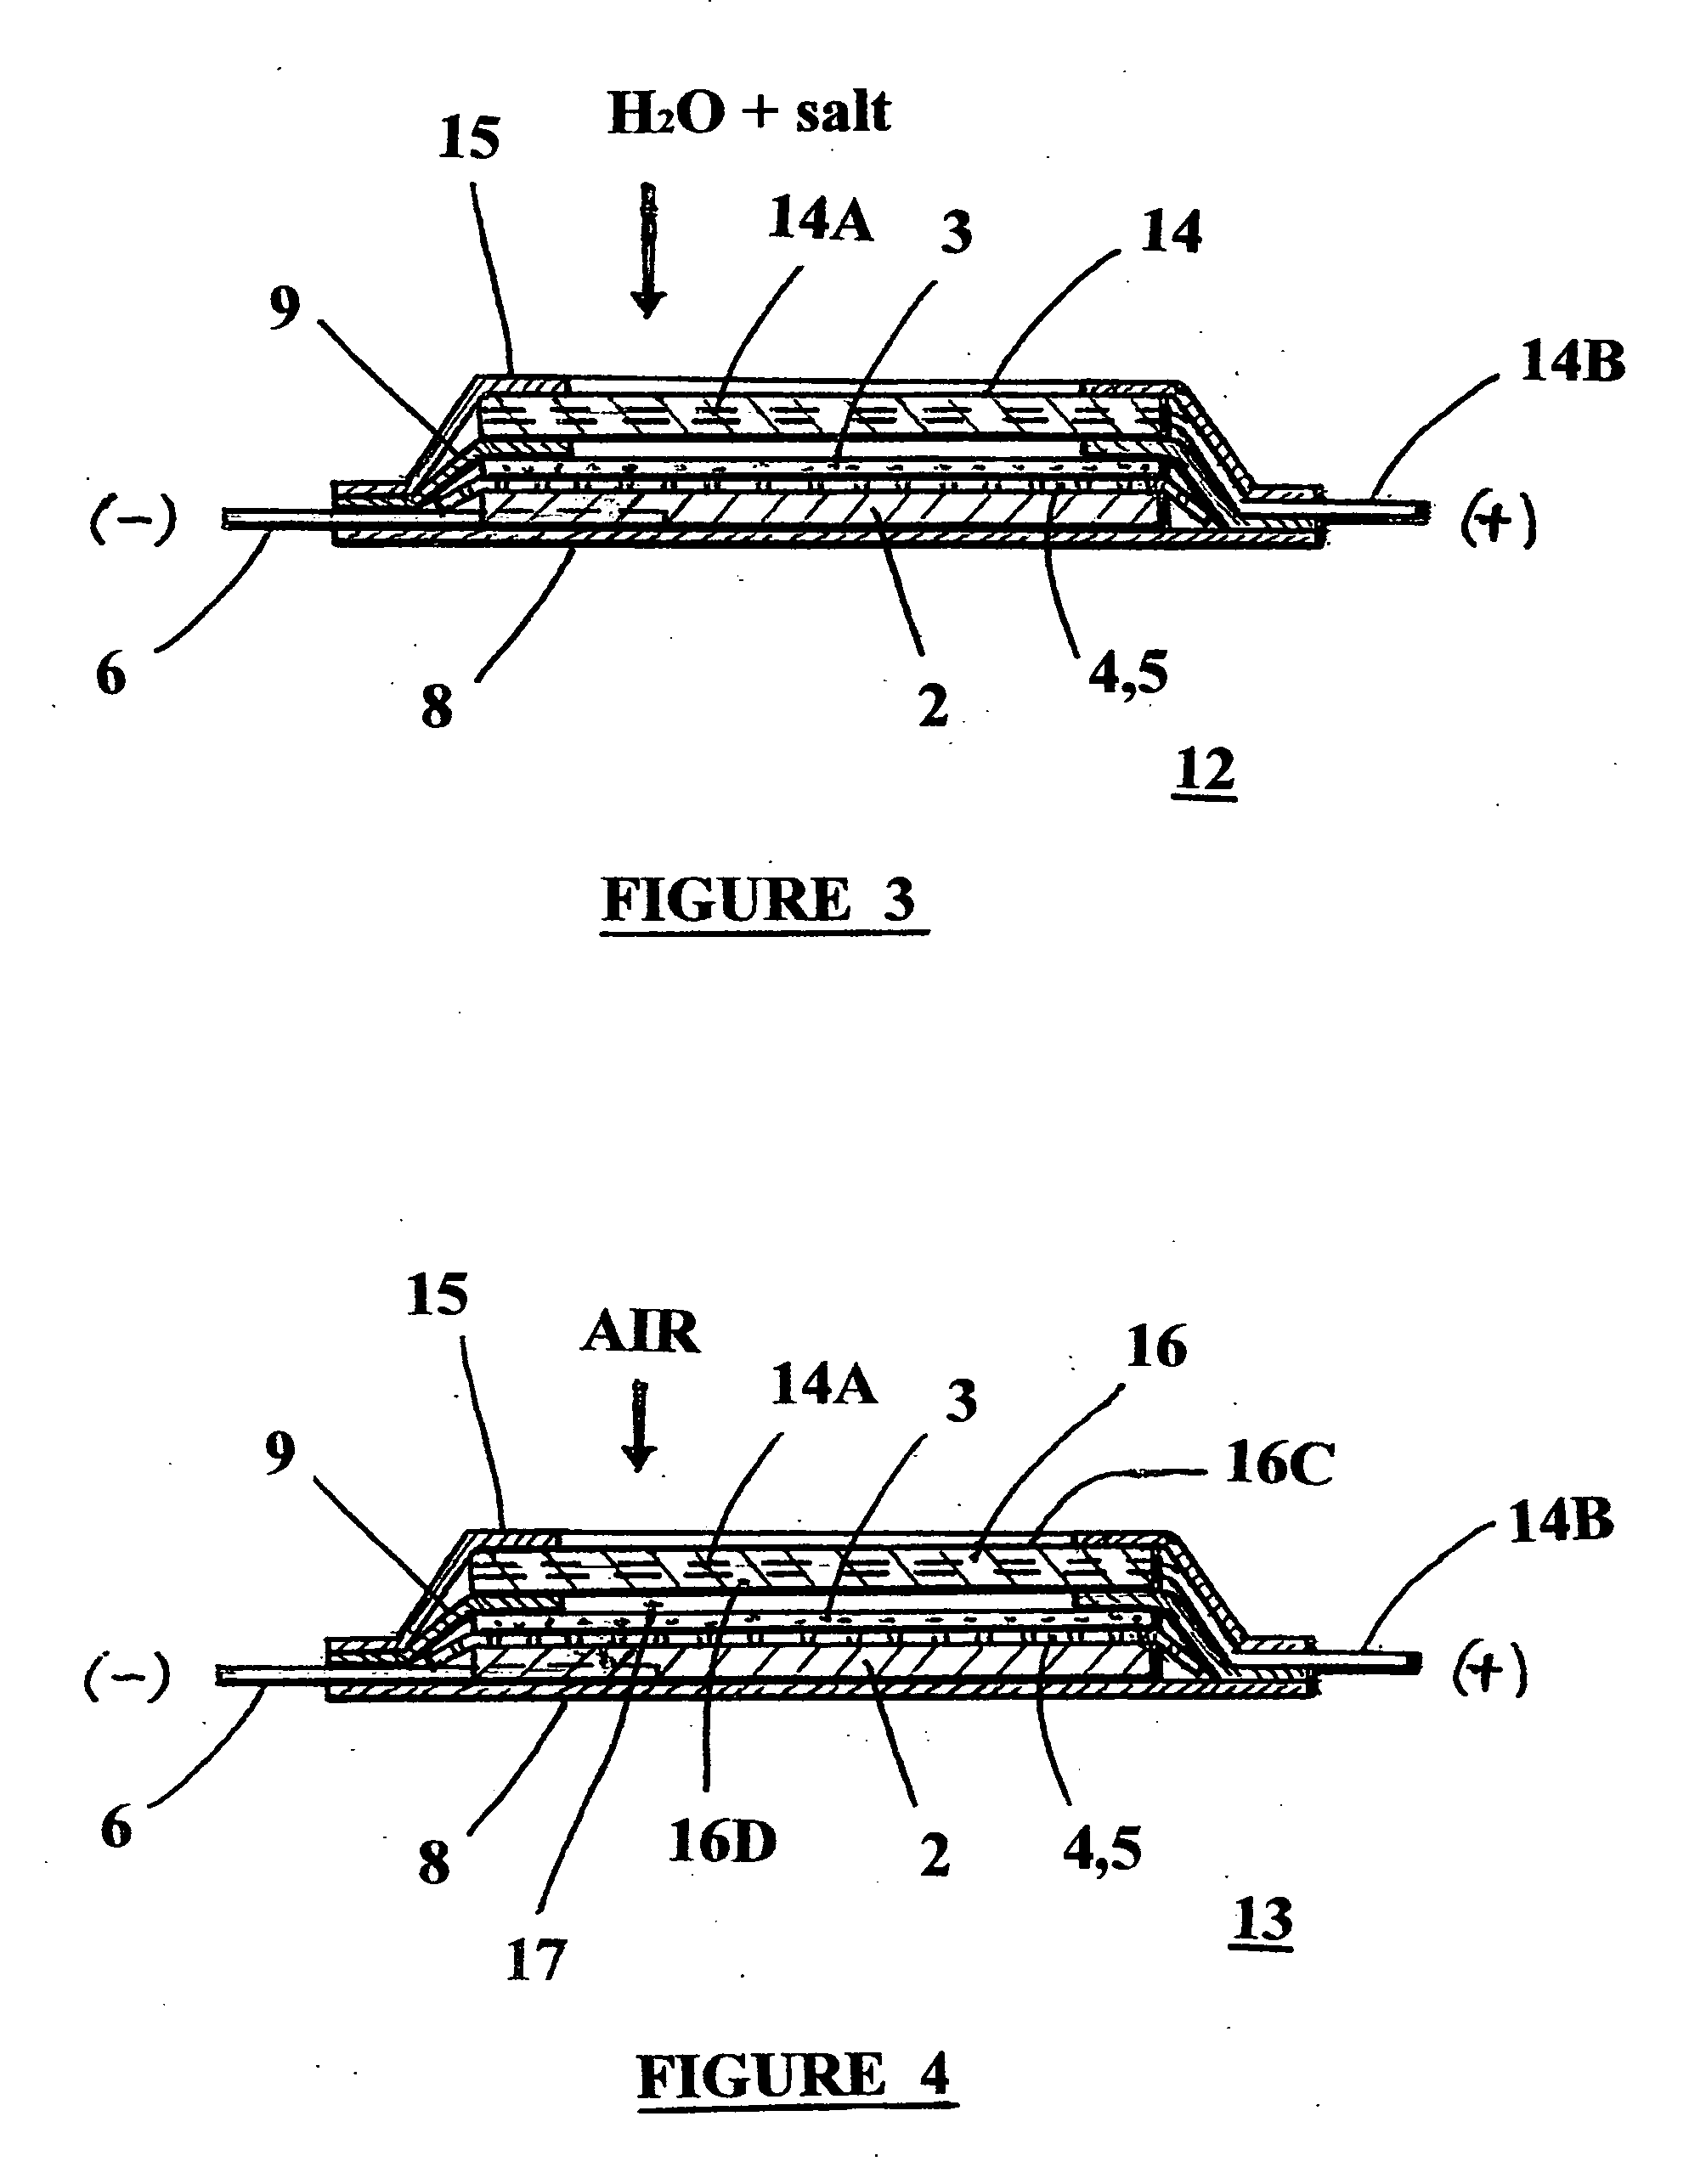 Lithium metal anode construction for seawater or air semi-fuel cells having flexible pouch packaging